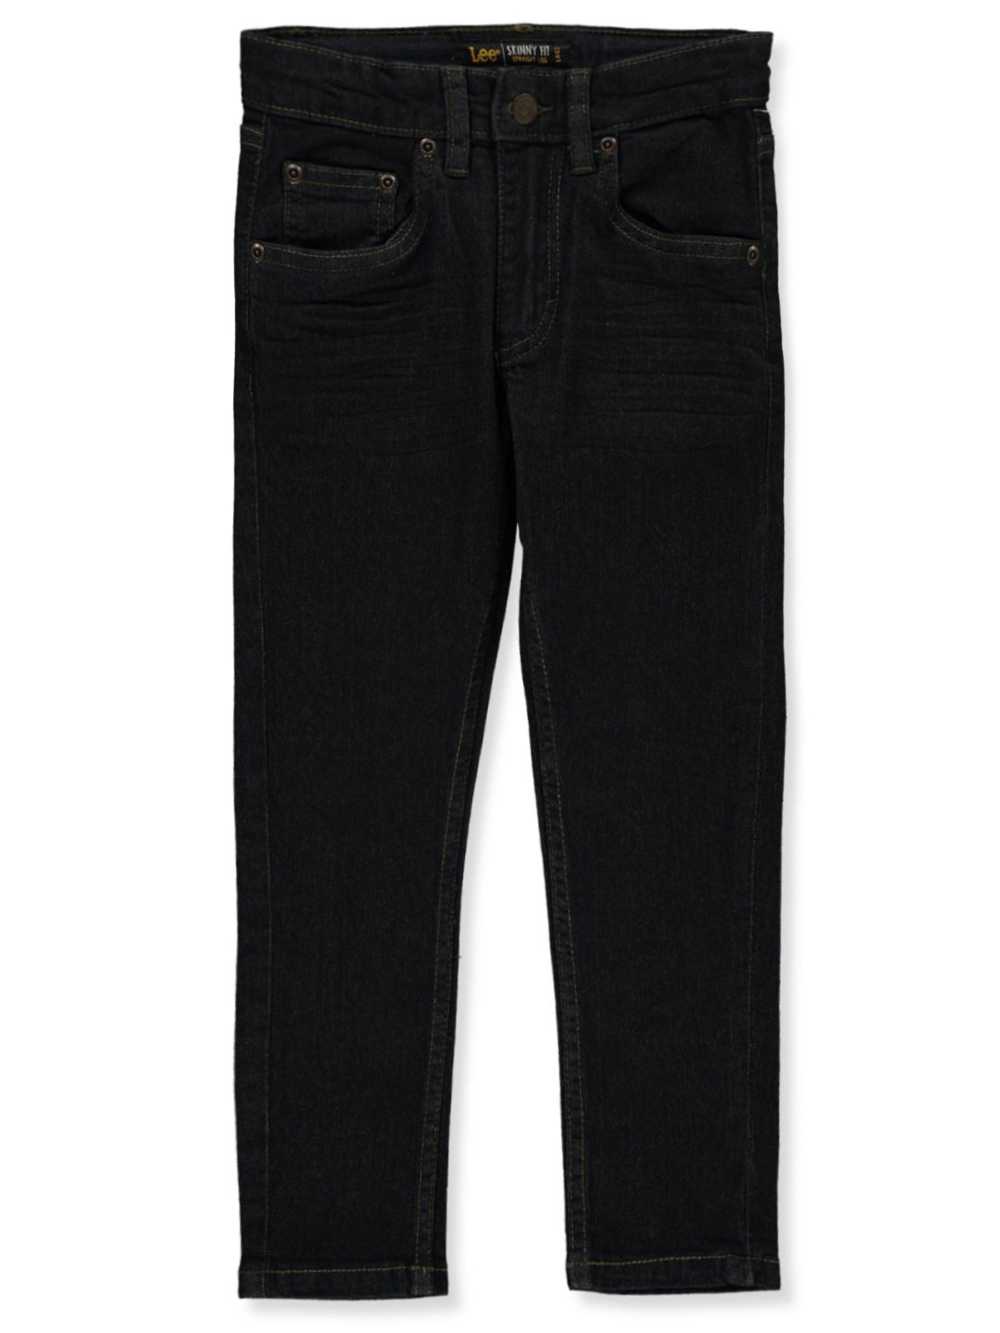 Buy Lee Sea Blue Cotton Skinny Fit Jeans for Mens Online @ Tata CLiQ